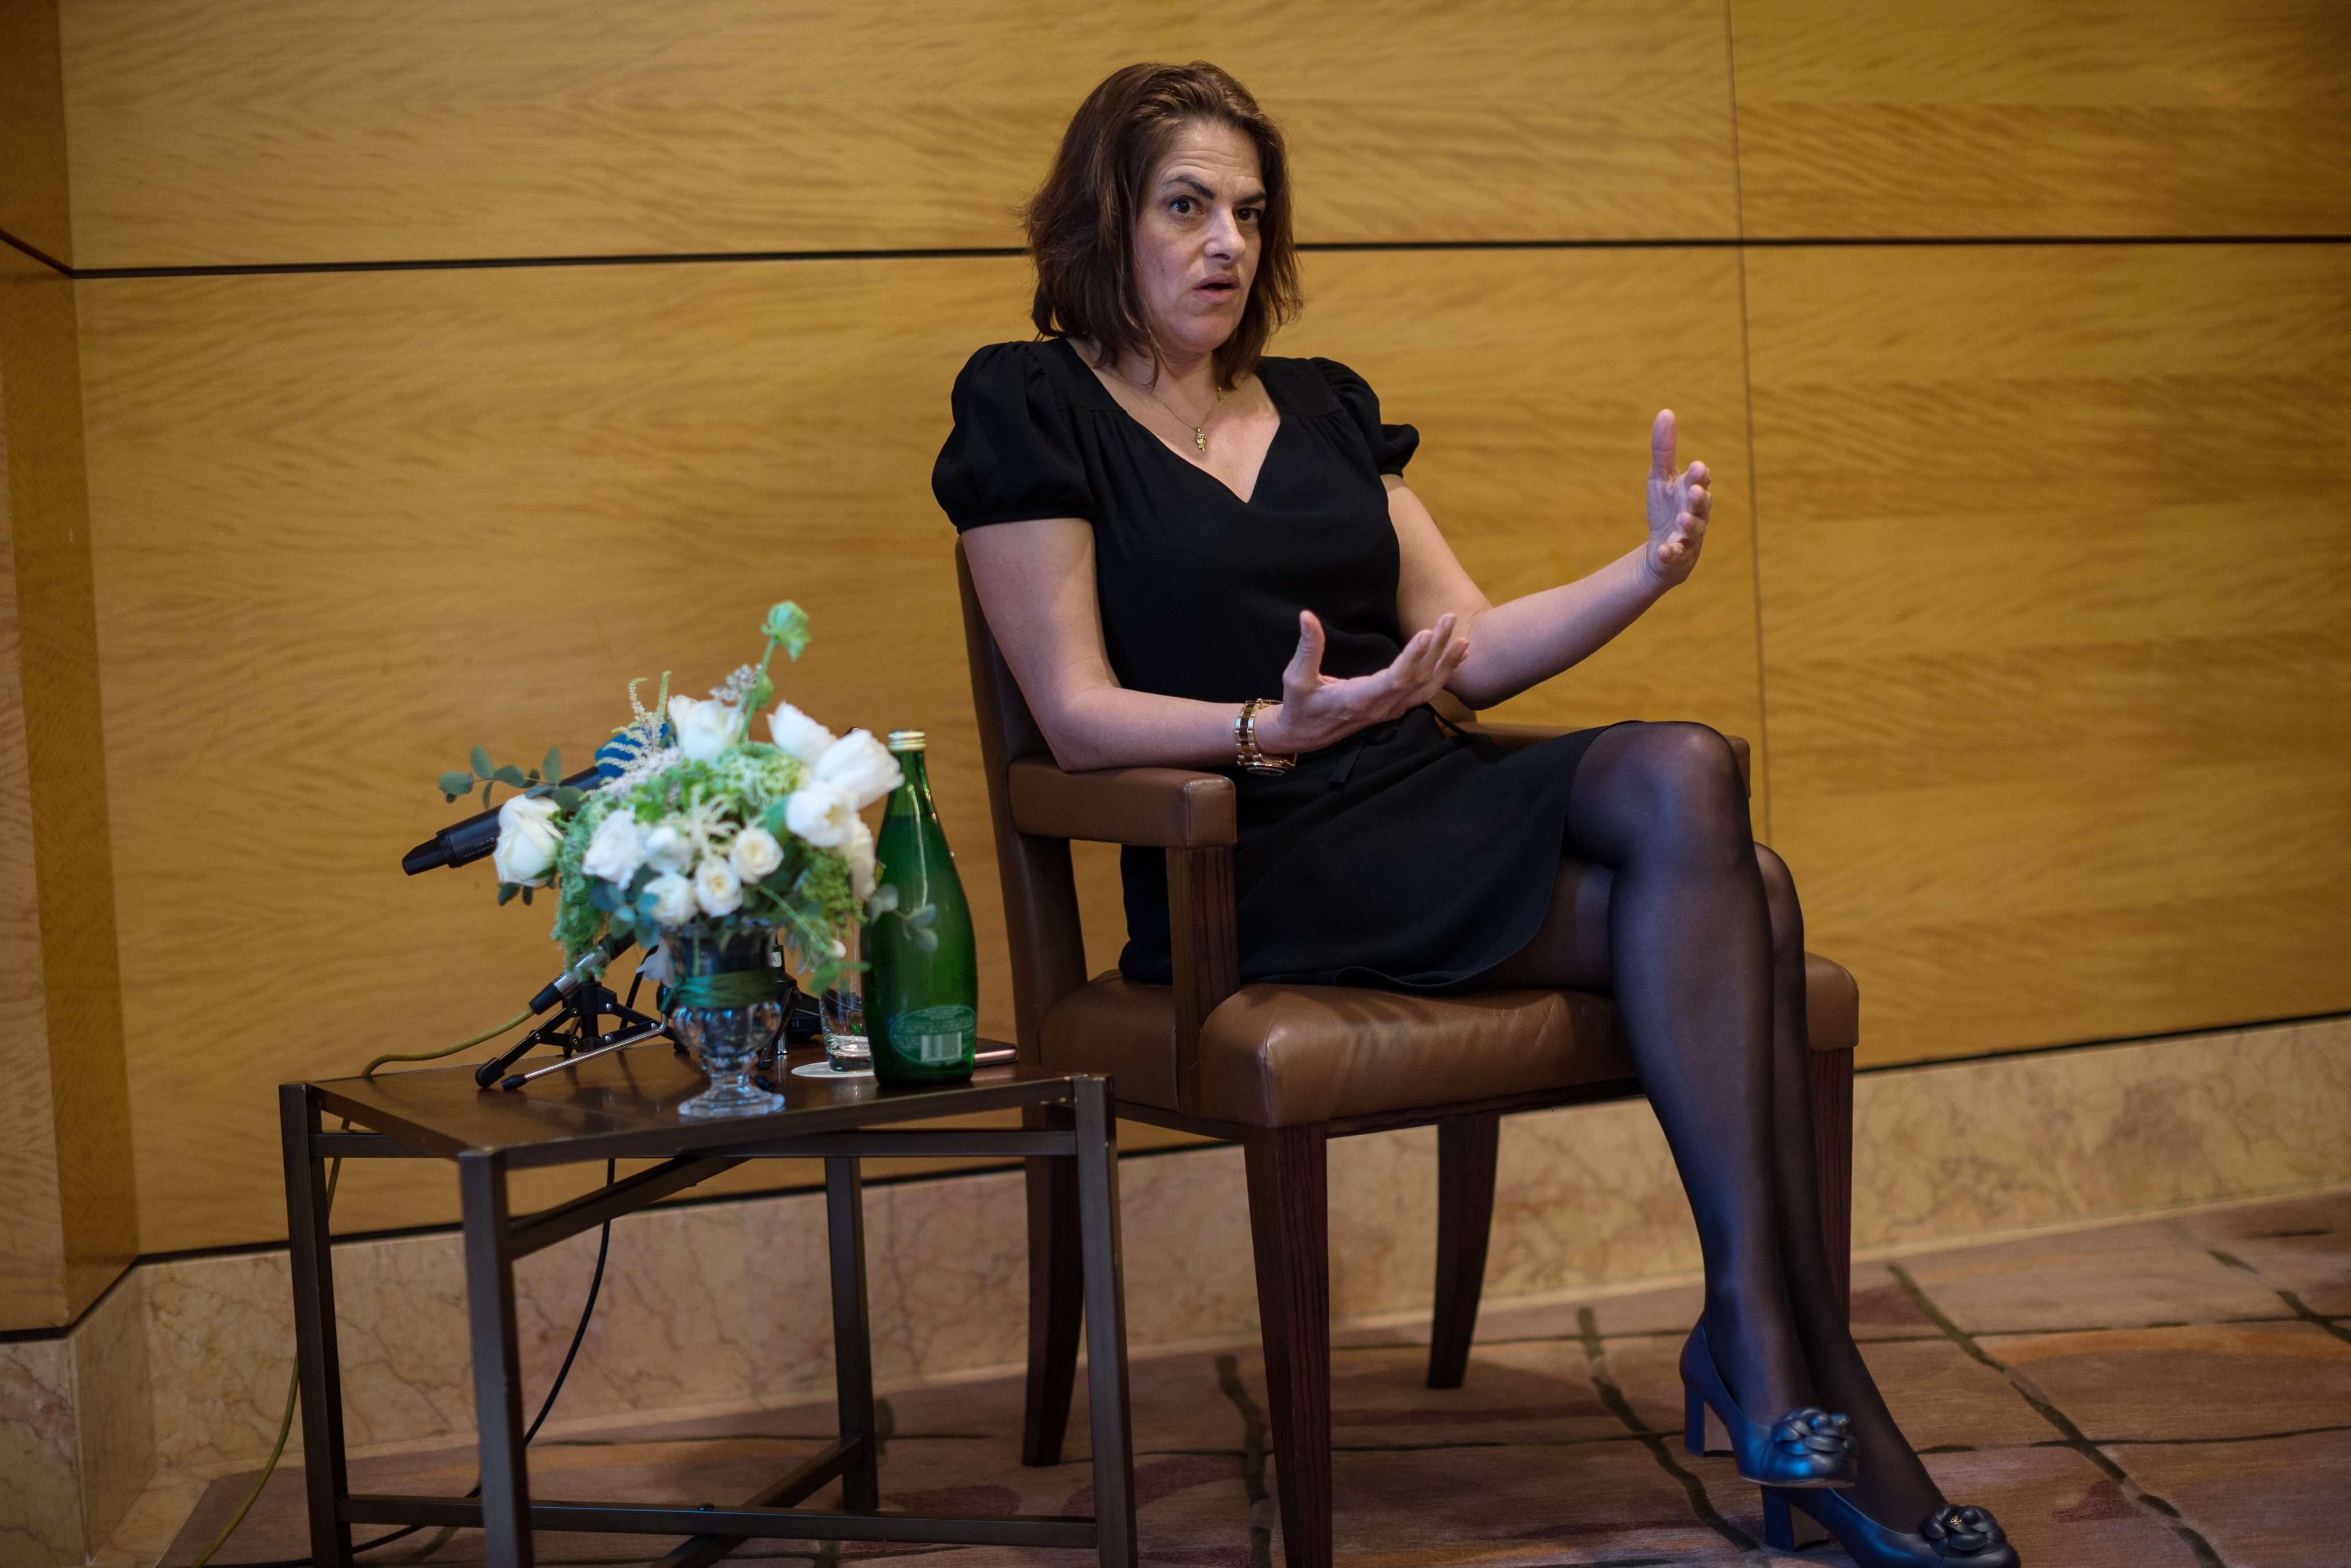 “If your questions are good, I’m going to say what I want to say”. British artist Tracey Emin begins her Hong Kong press conference with conditions. Photo: EPA